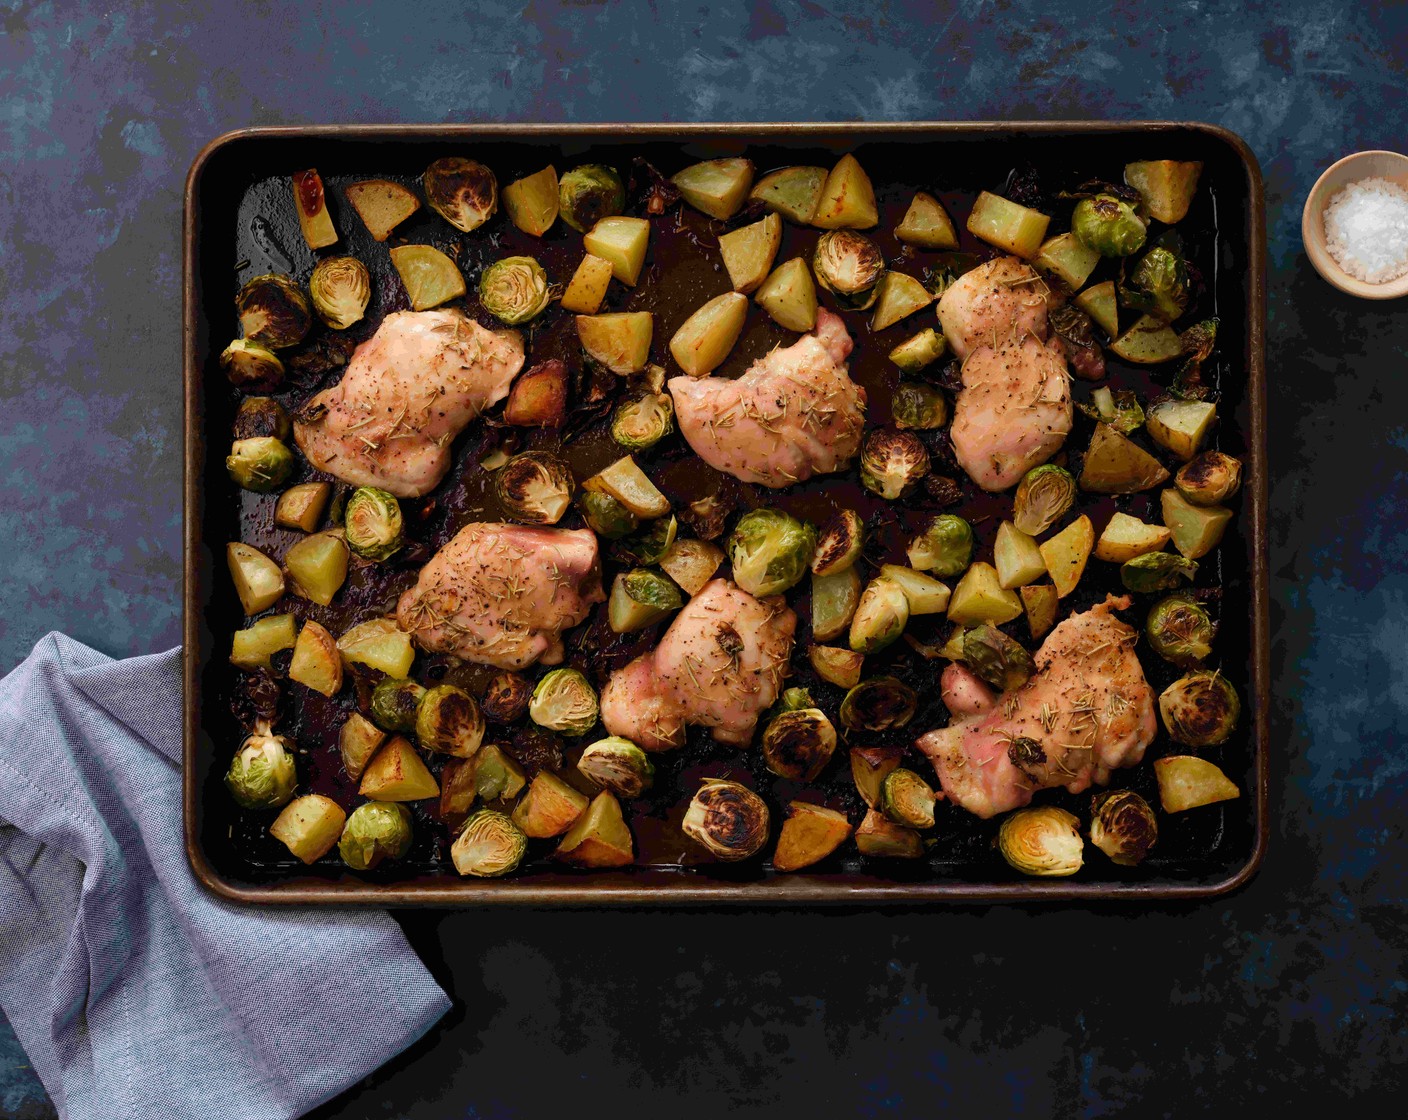 step 6 When the chicken and potatoes reach the 15-minute mark, put the Brussels sprouts in the oven. Roast for 10 to 15 minutes until the veggies are lightly browned and the chicken has reached an internal temperature of 165 degrees F (74 degrees C), then serve.